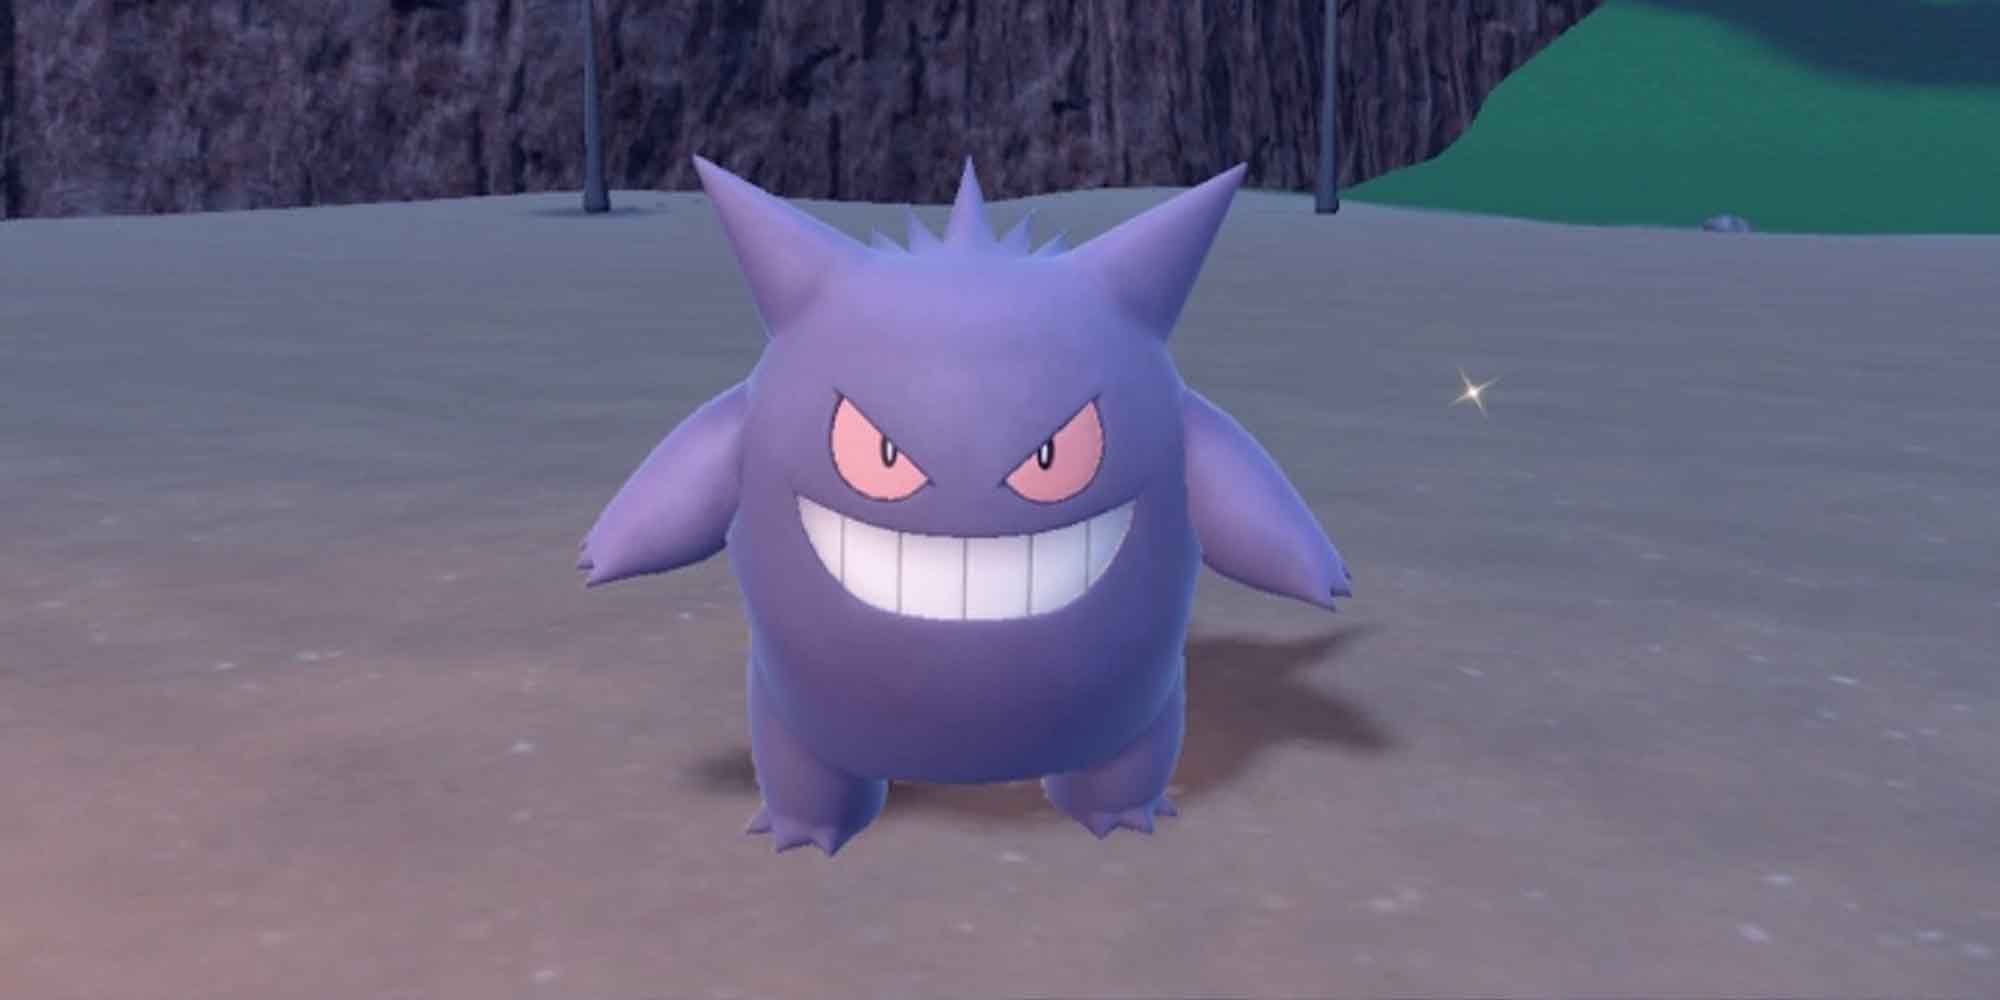 Do you think they made Gengar's shiny better in S/V? He looks more  darkish-grey to me in the new games which looks a bit better then the old  shinies he's has. What